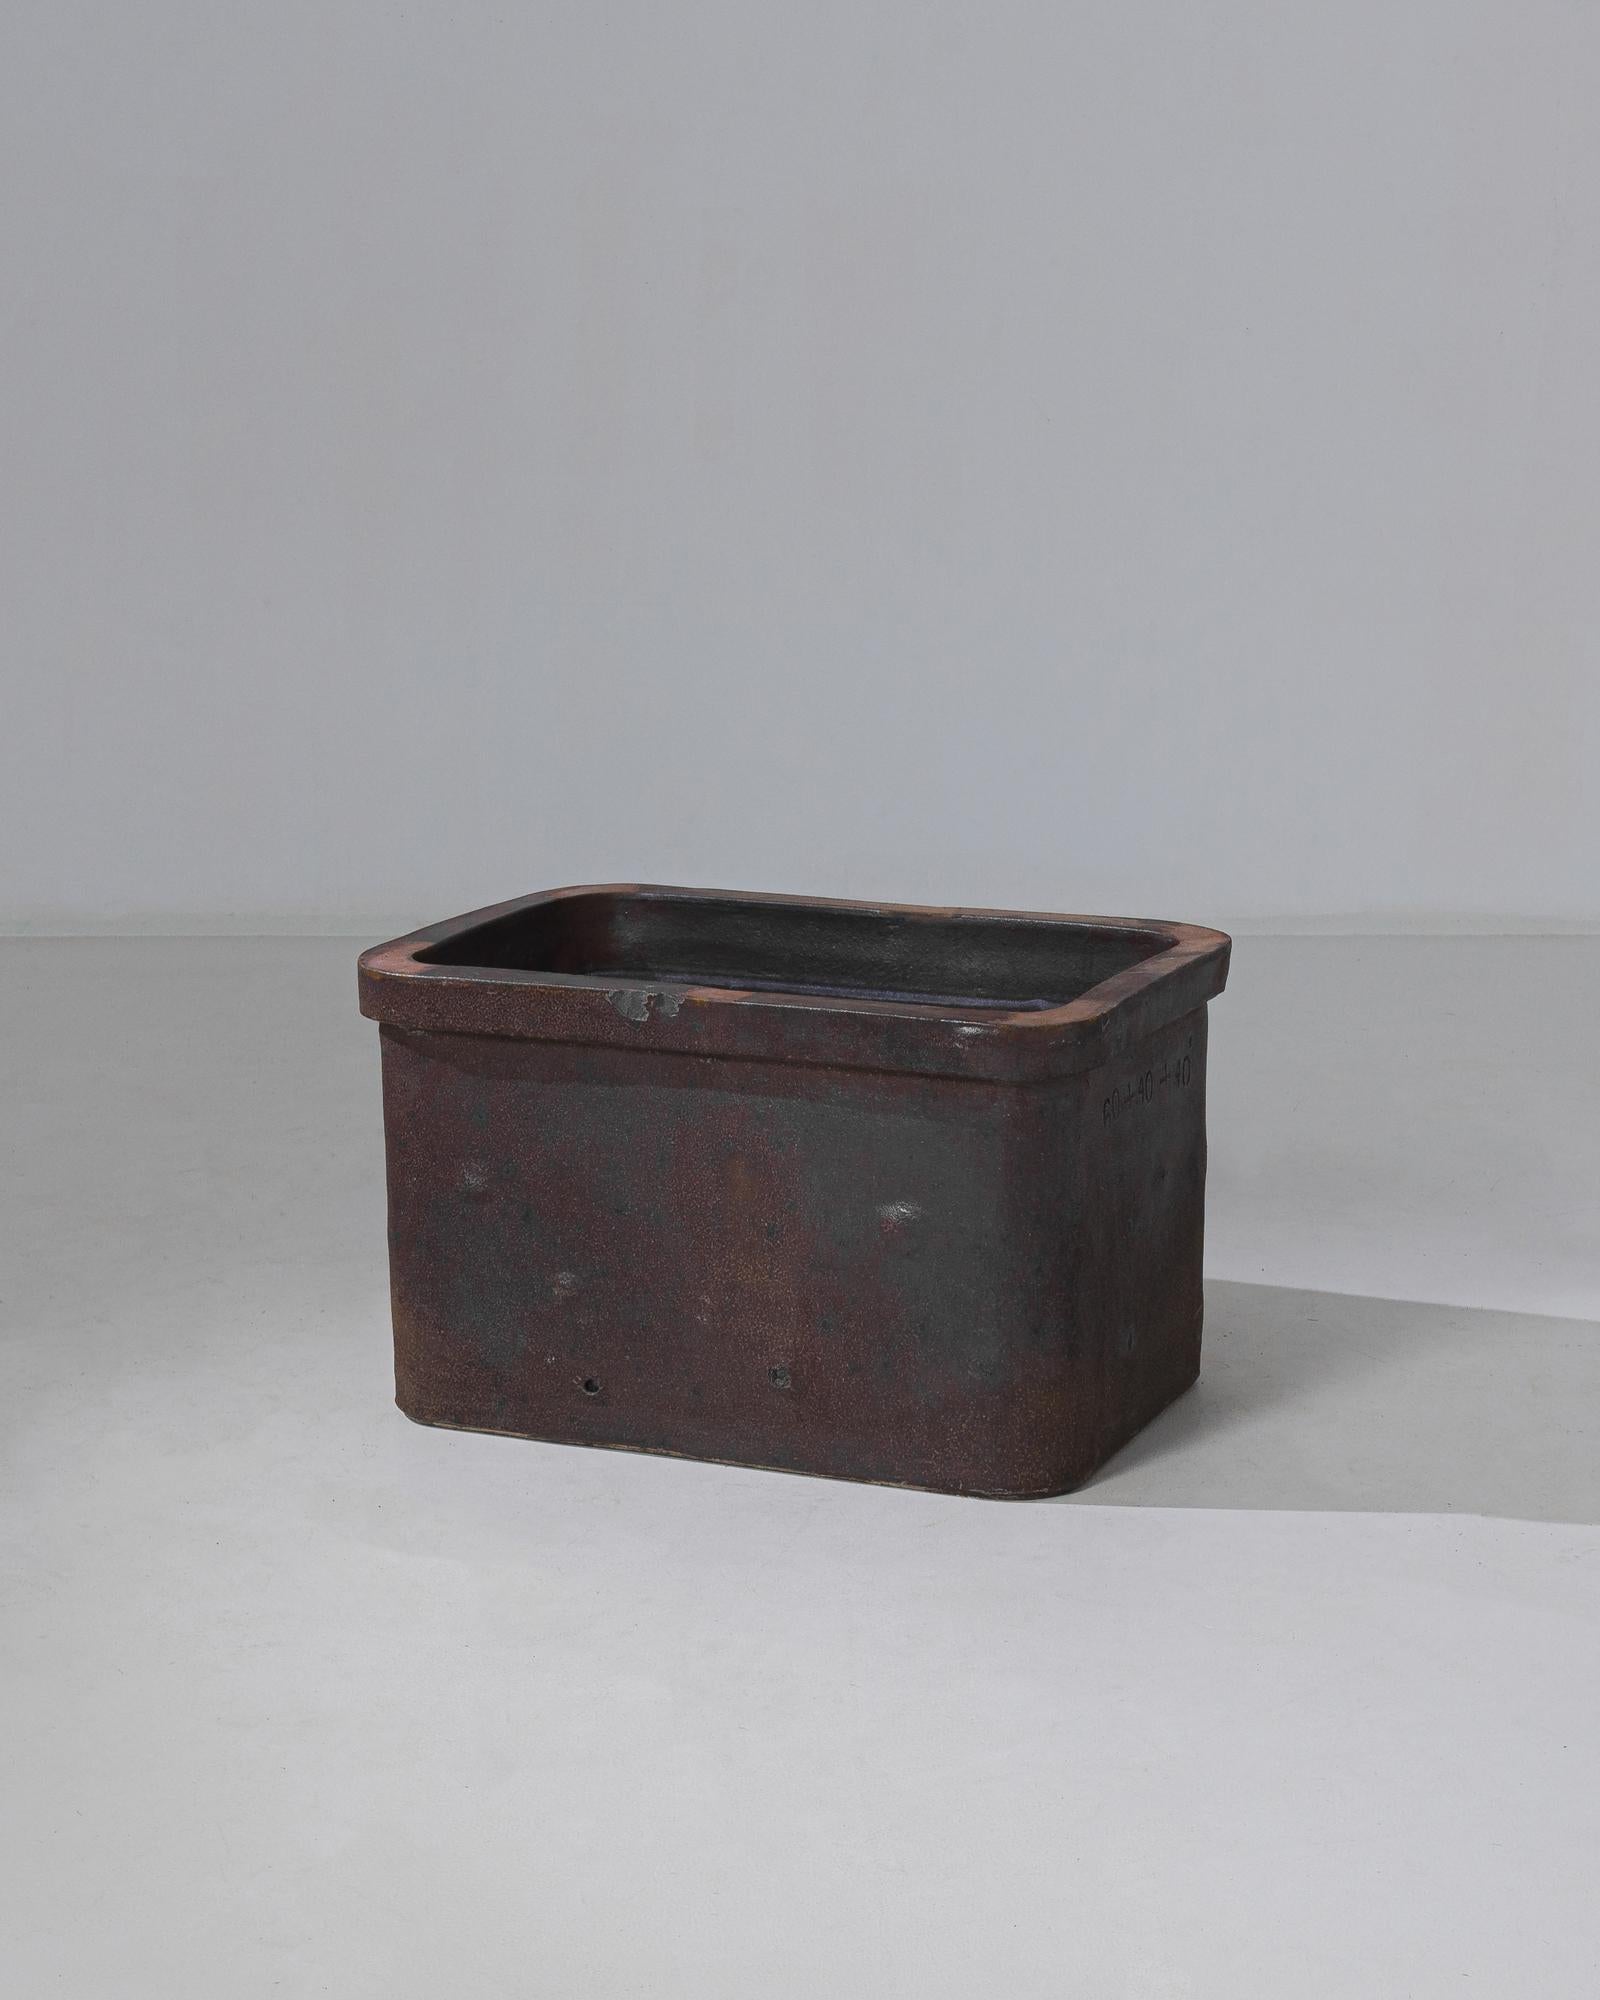 This ceramic planter was made in Belgium, circa 1930. The rectangular form features rounded edges and a thick rim. Seasoned over time, the planter displays a pewter gray patina blended with a reddish-blend hue. A solid and functional display piece,